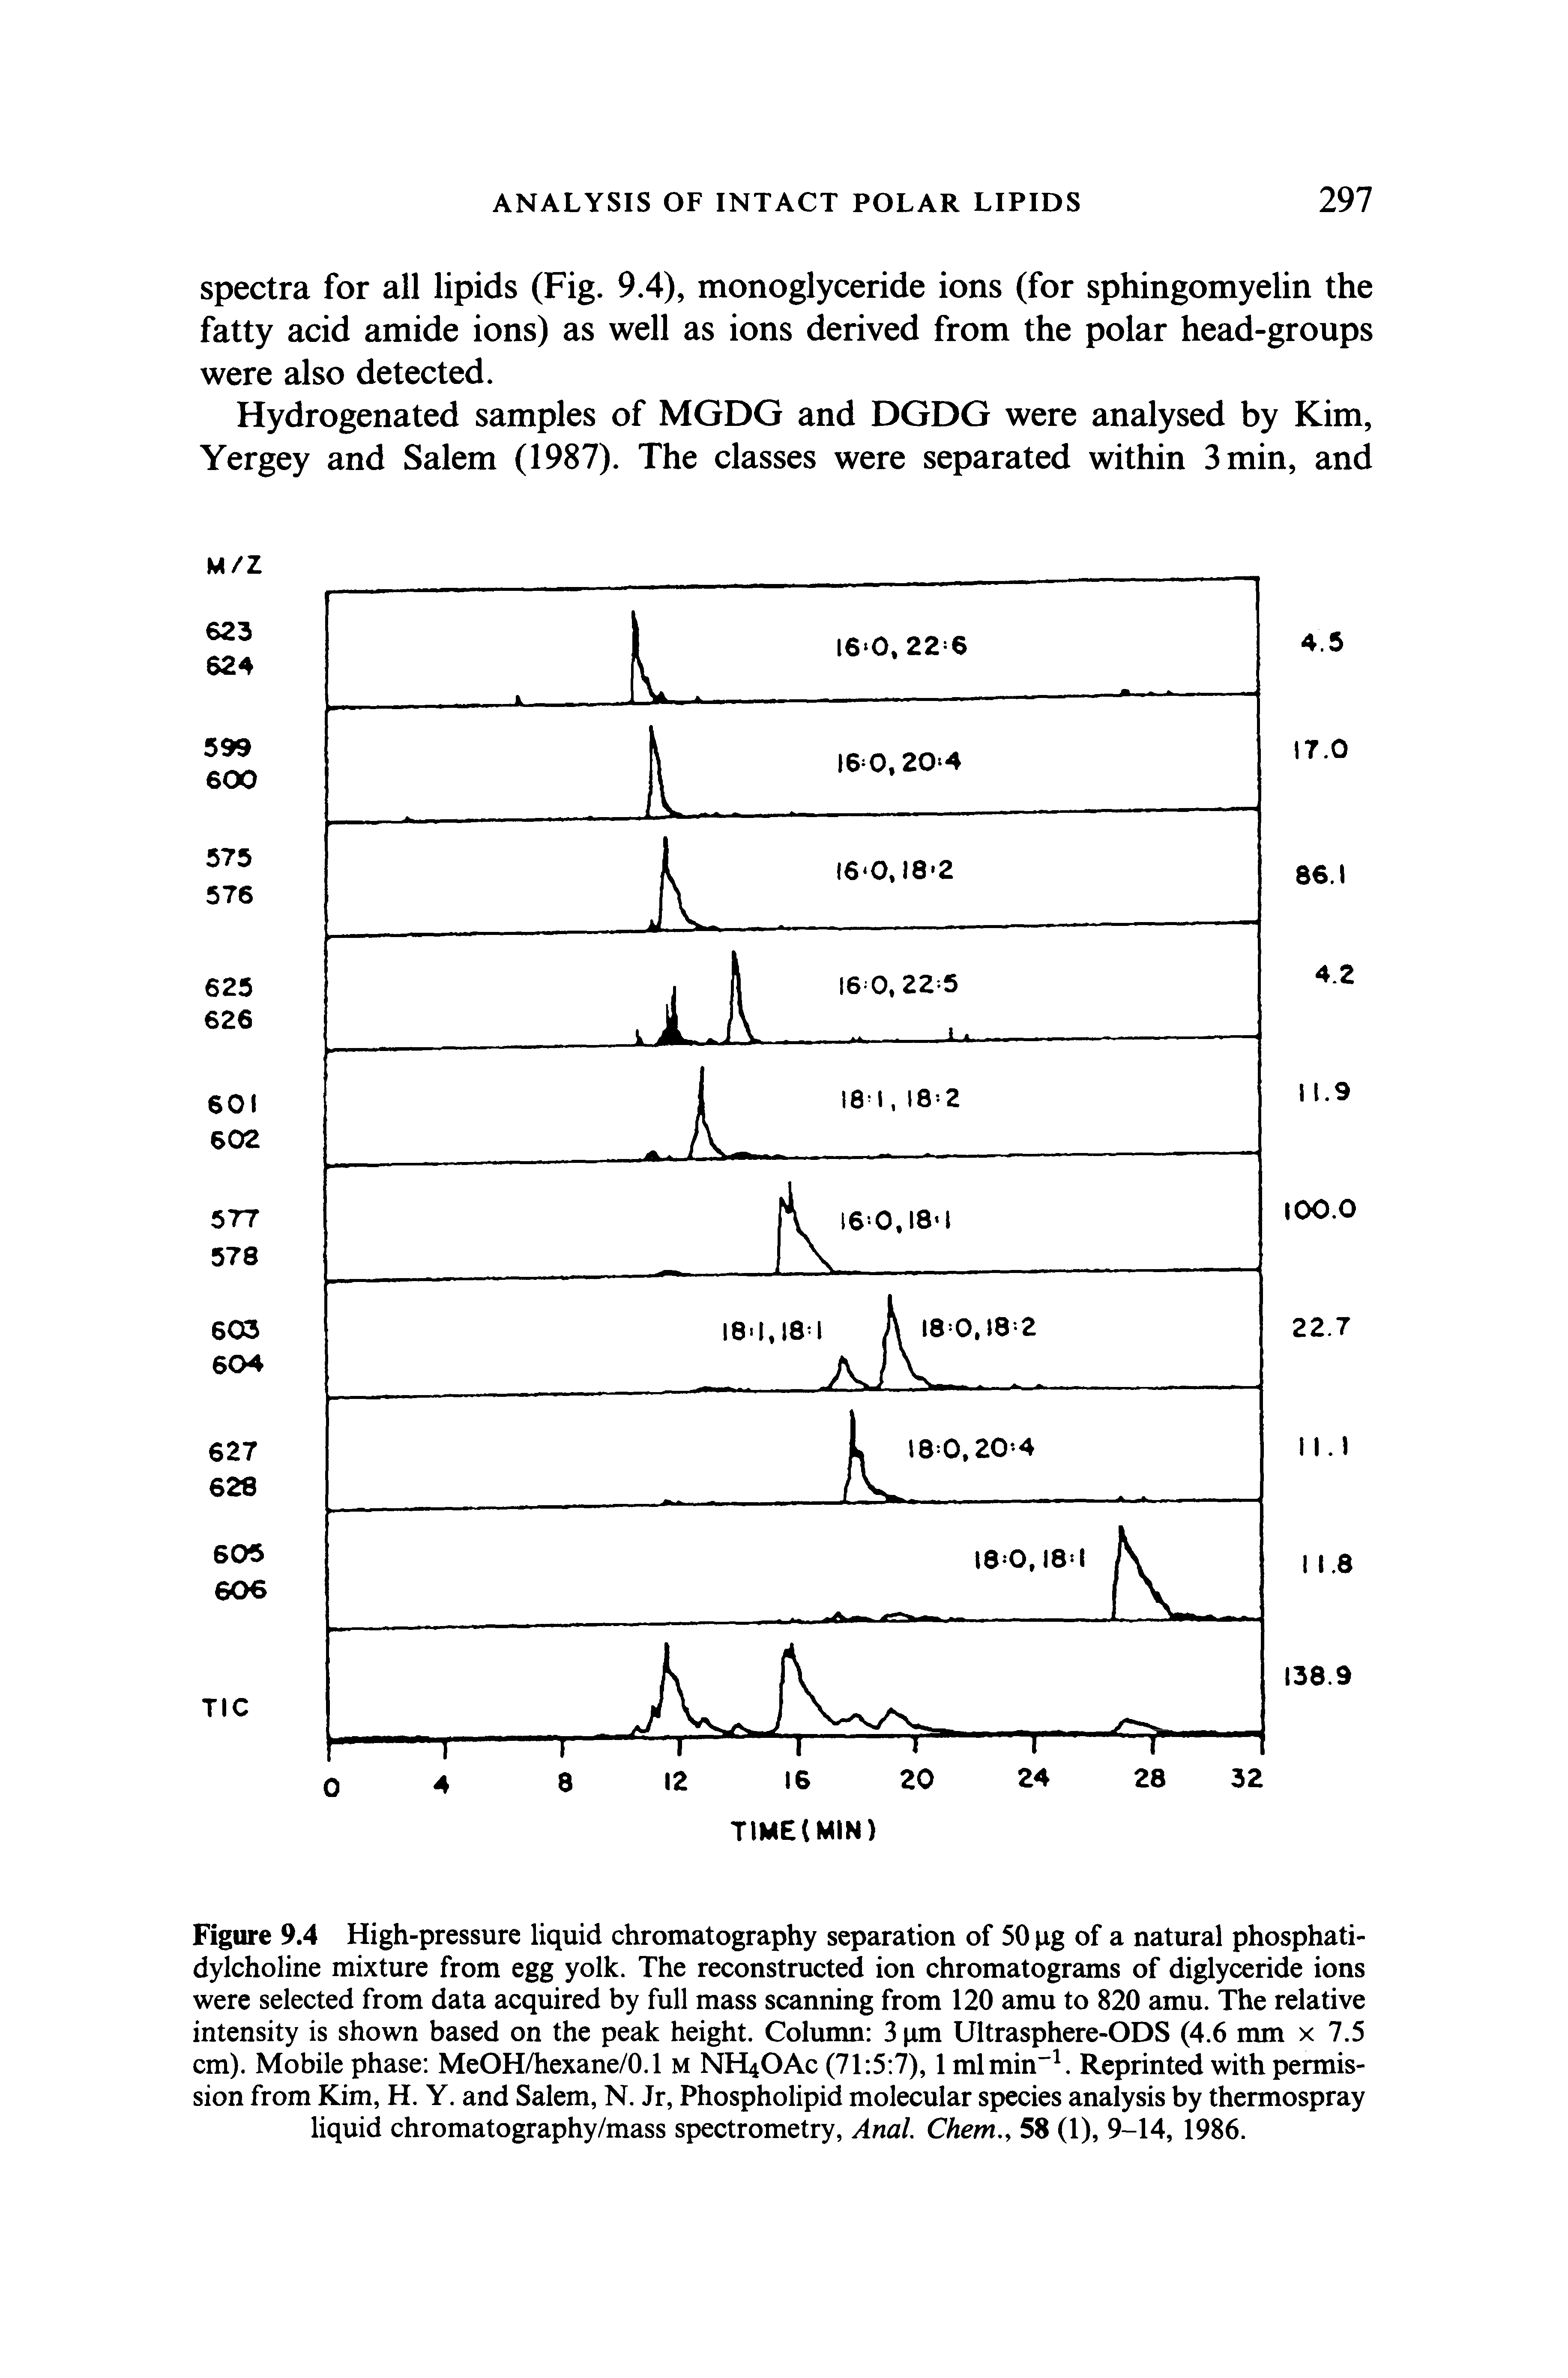 Figure 9.4 High-pressure liquid chromatography separation of 50 pg of a natural phosphatidylcholine mixture from egg yolk. The reconstructed ion chromatograms of diglyceride ions were selected from data acquired by full mass scanning from 120 amu to 820 amu. The relative intensity is shown based on the peak height. Column 3 pm Ultrasphere-ODS (4.6 mm x 7.5 cm). Mobile phase MeOH/hexane/0.1 m NH4OAC (71 5 7), 1 mlmin . Reprinted with permission from Kim, H. Y. and Salem, N. Jr, Phospholipid molecular species analysis by thermospray liquid chromatography/mass spectrometry. Anal. Chem., 58 (1), 9-14, 1986.